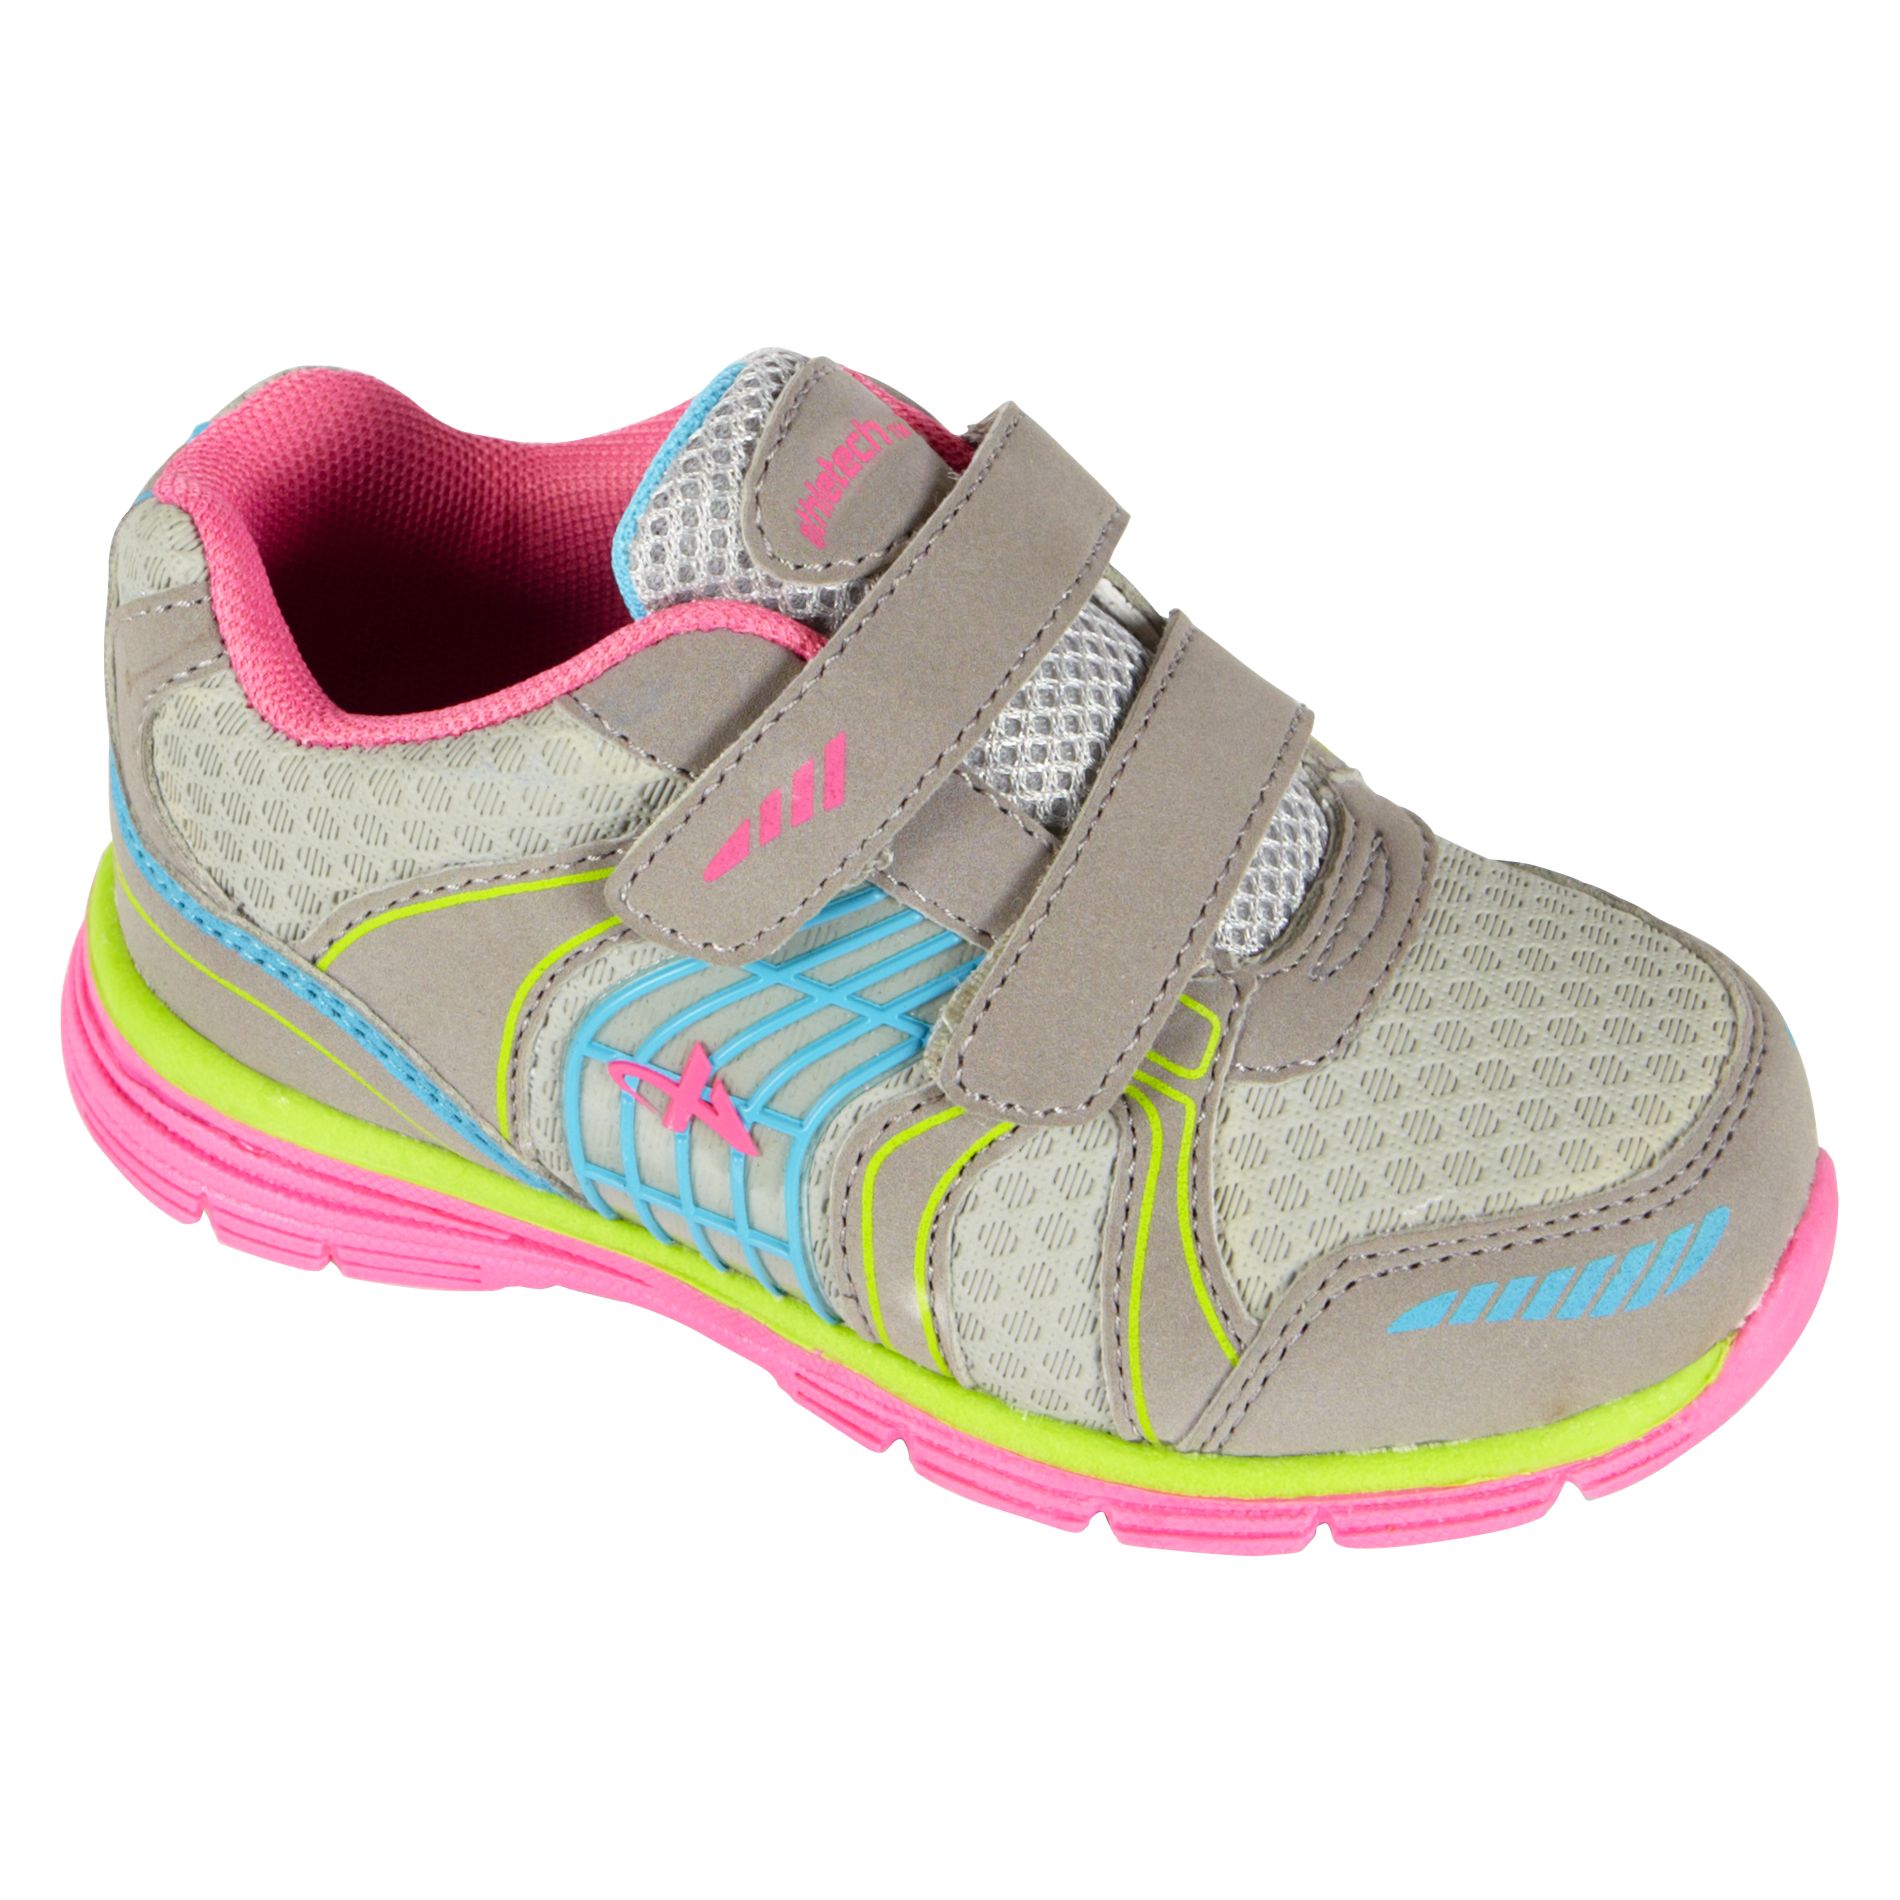 Athletech Toddler Girl's Jogger Lil Willow - Grey/Multi